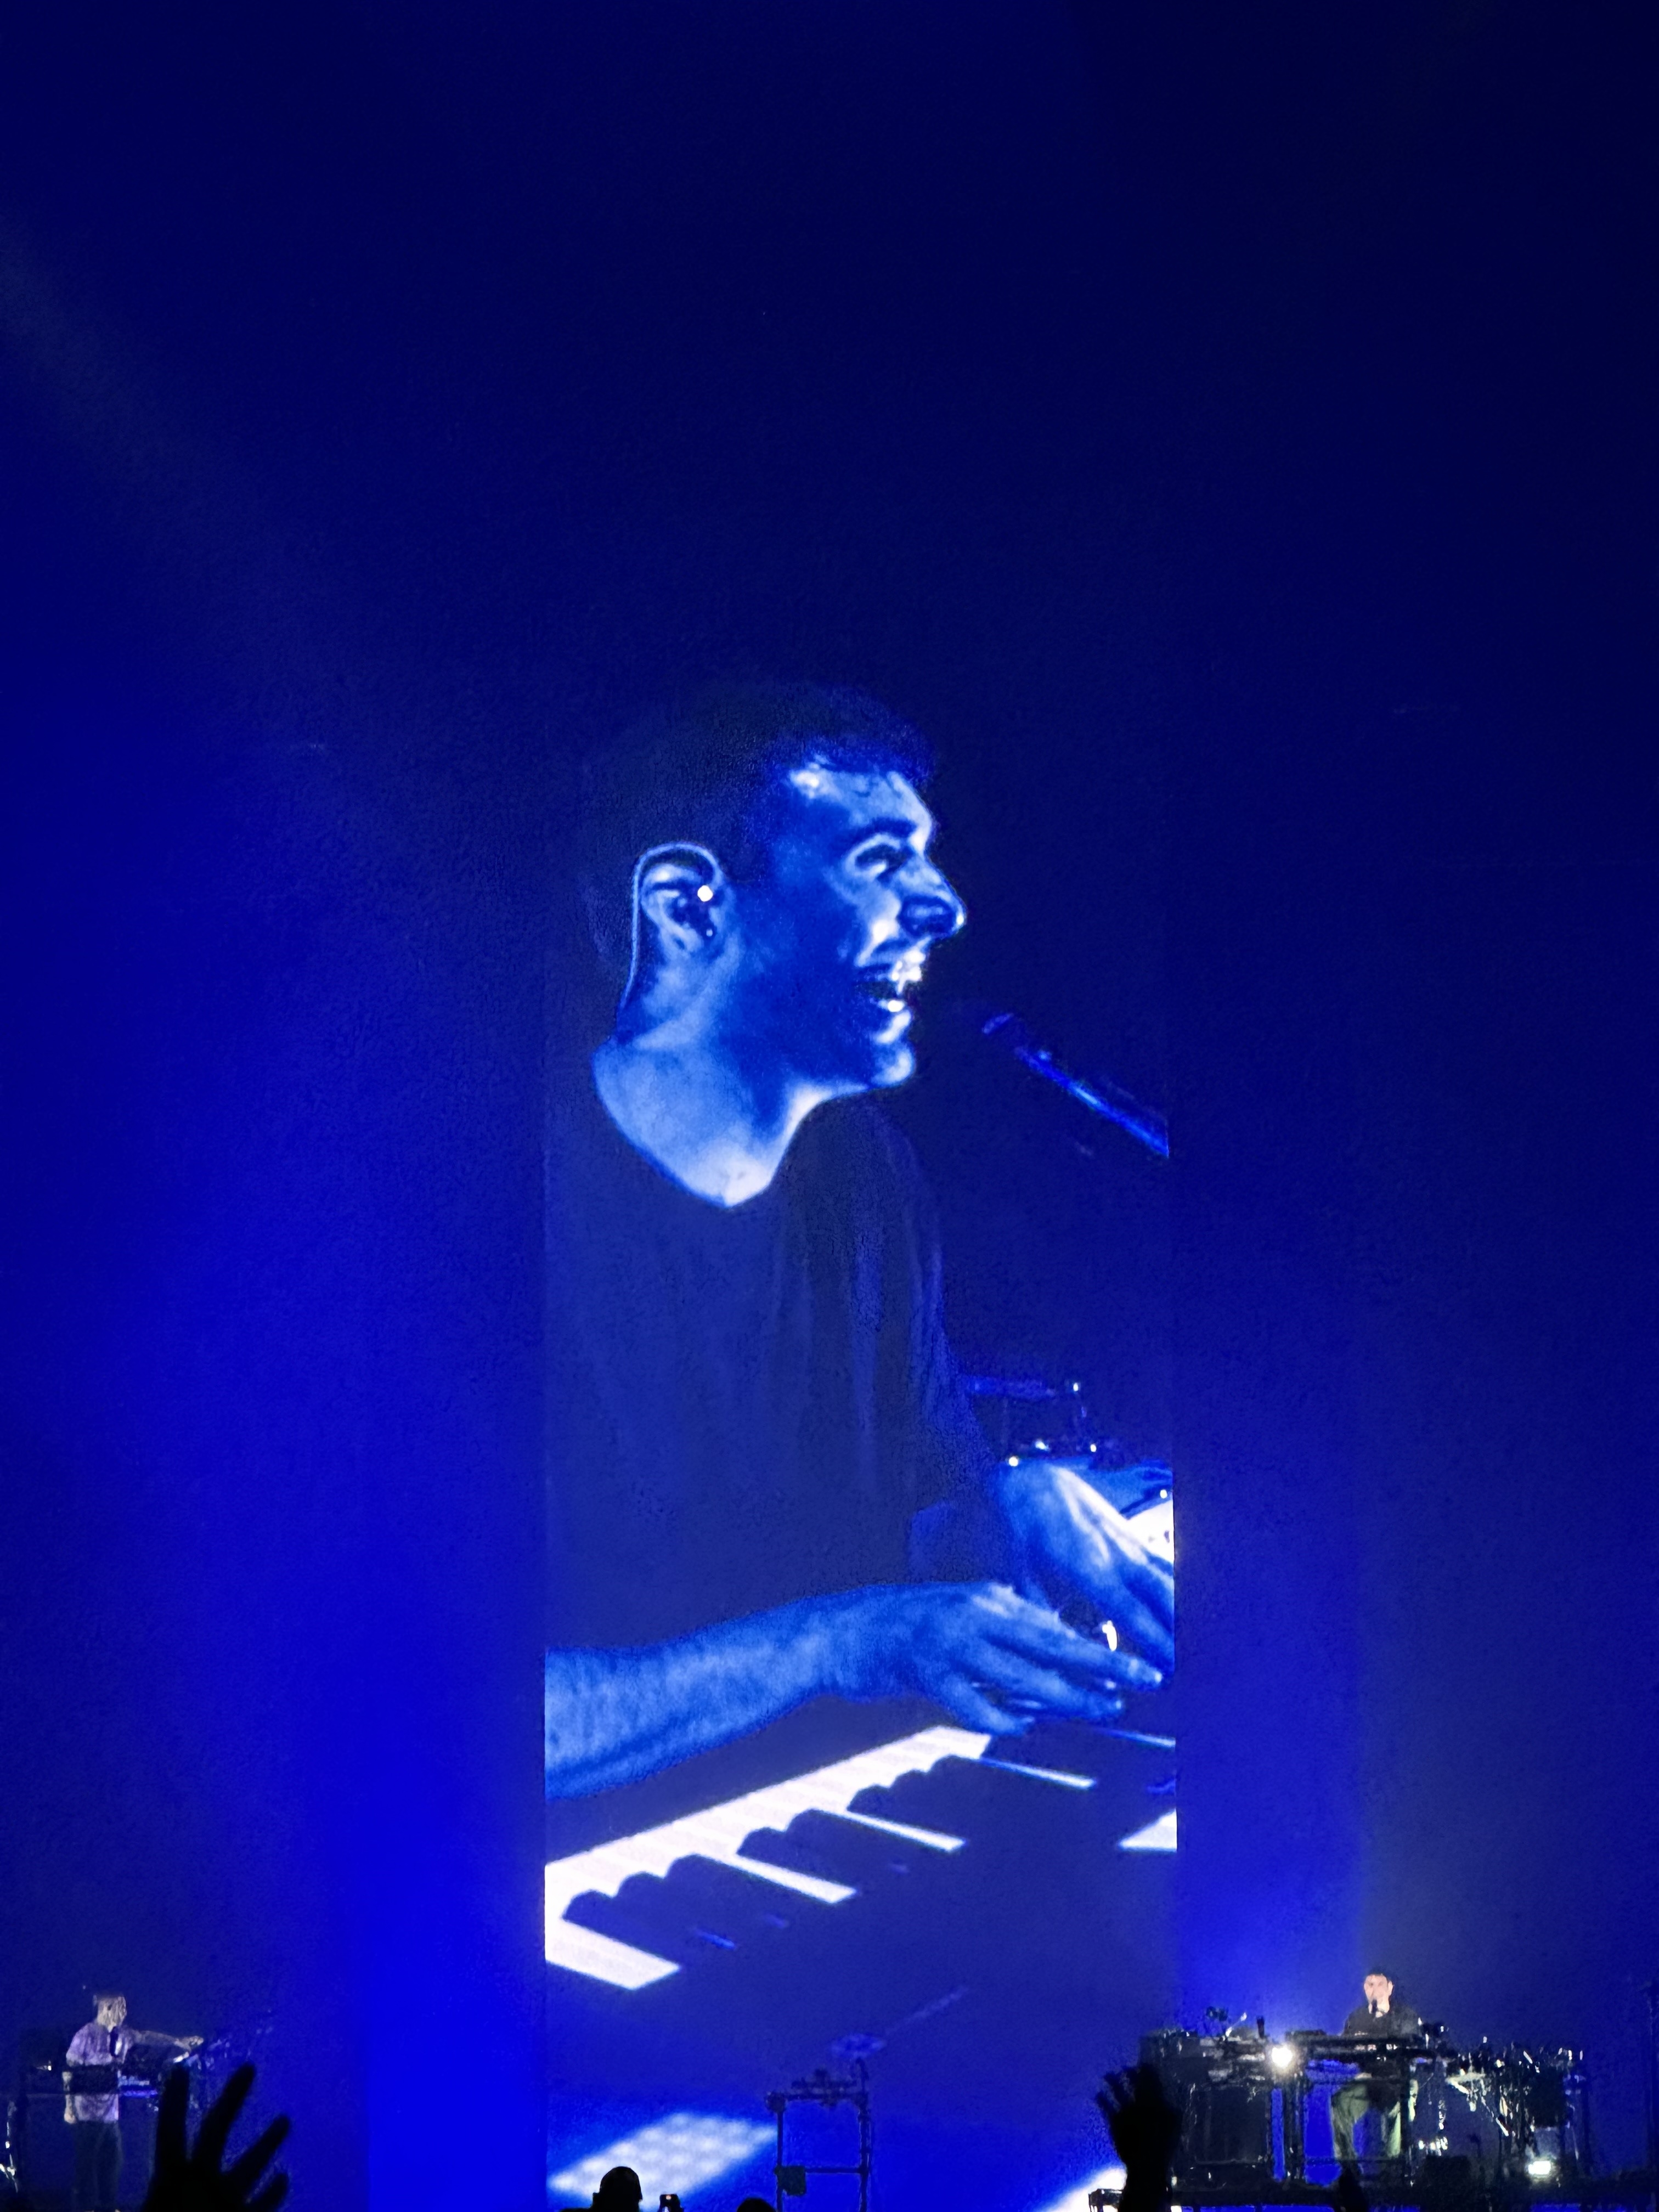 Man performing live on piano projected on large screen